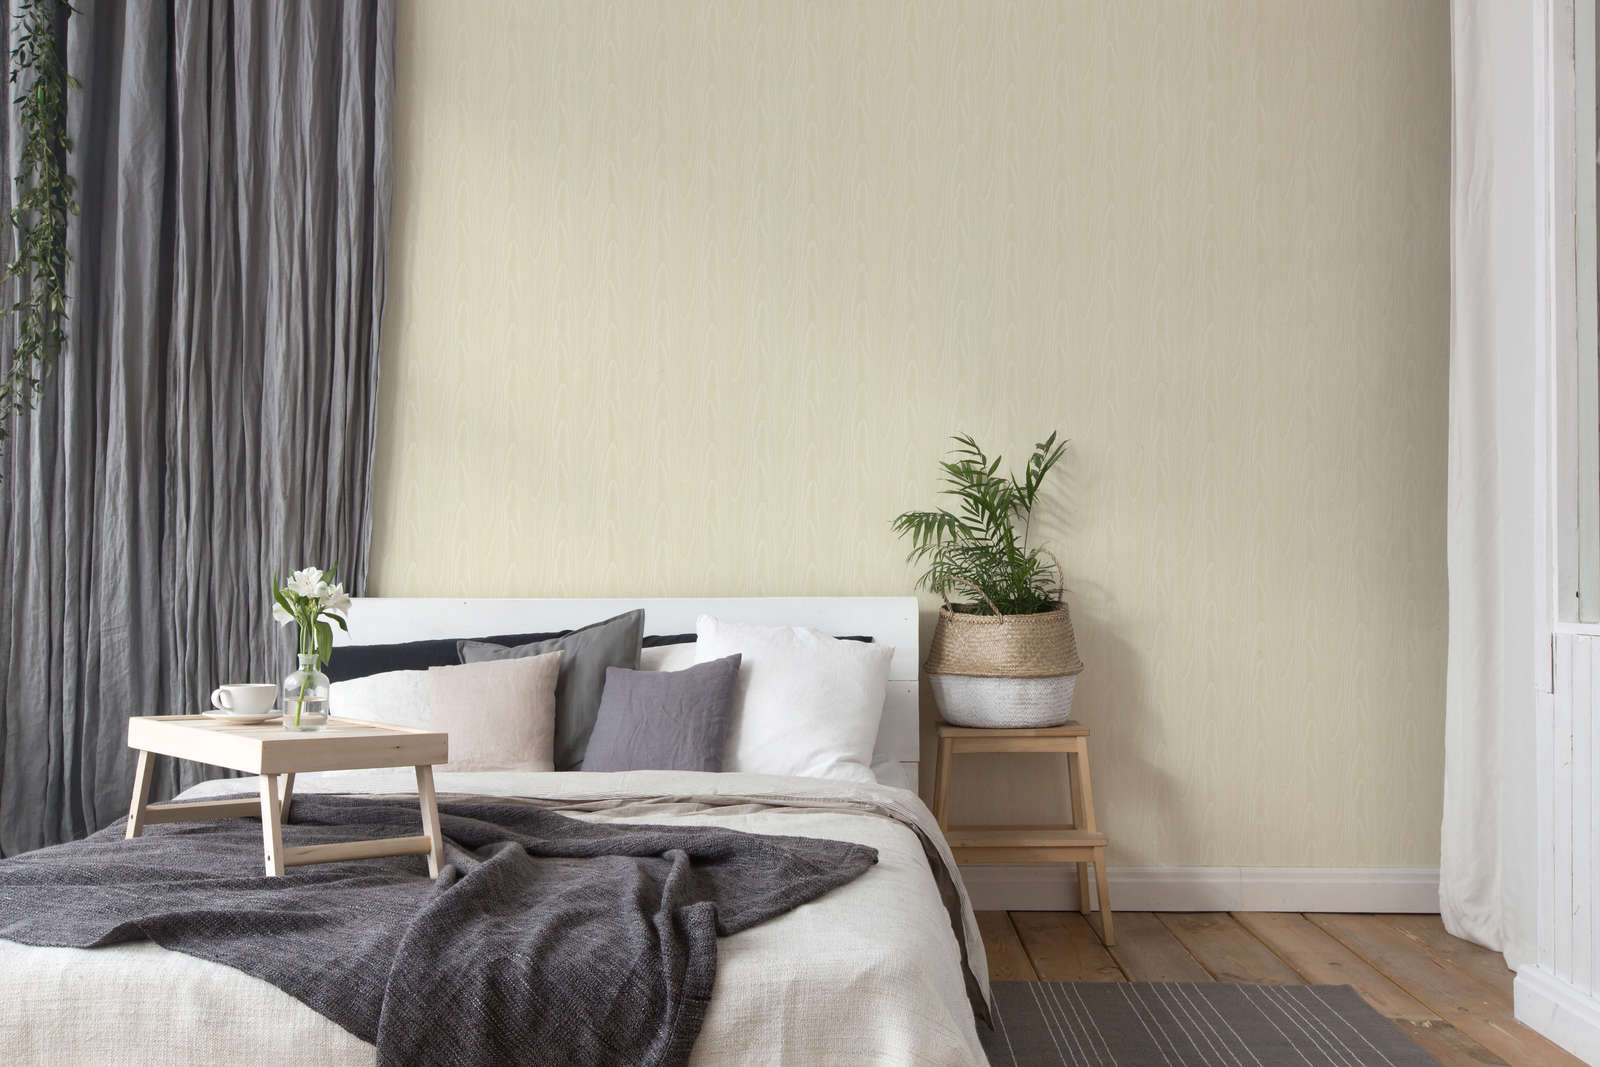             Moiré wallpaper with textile pattern & satin finish - cream
        